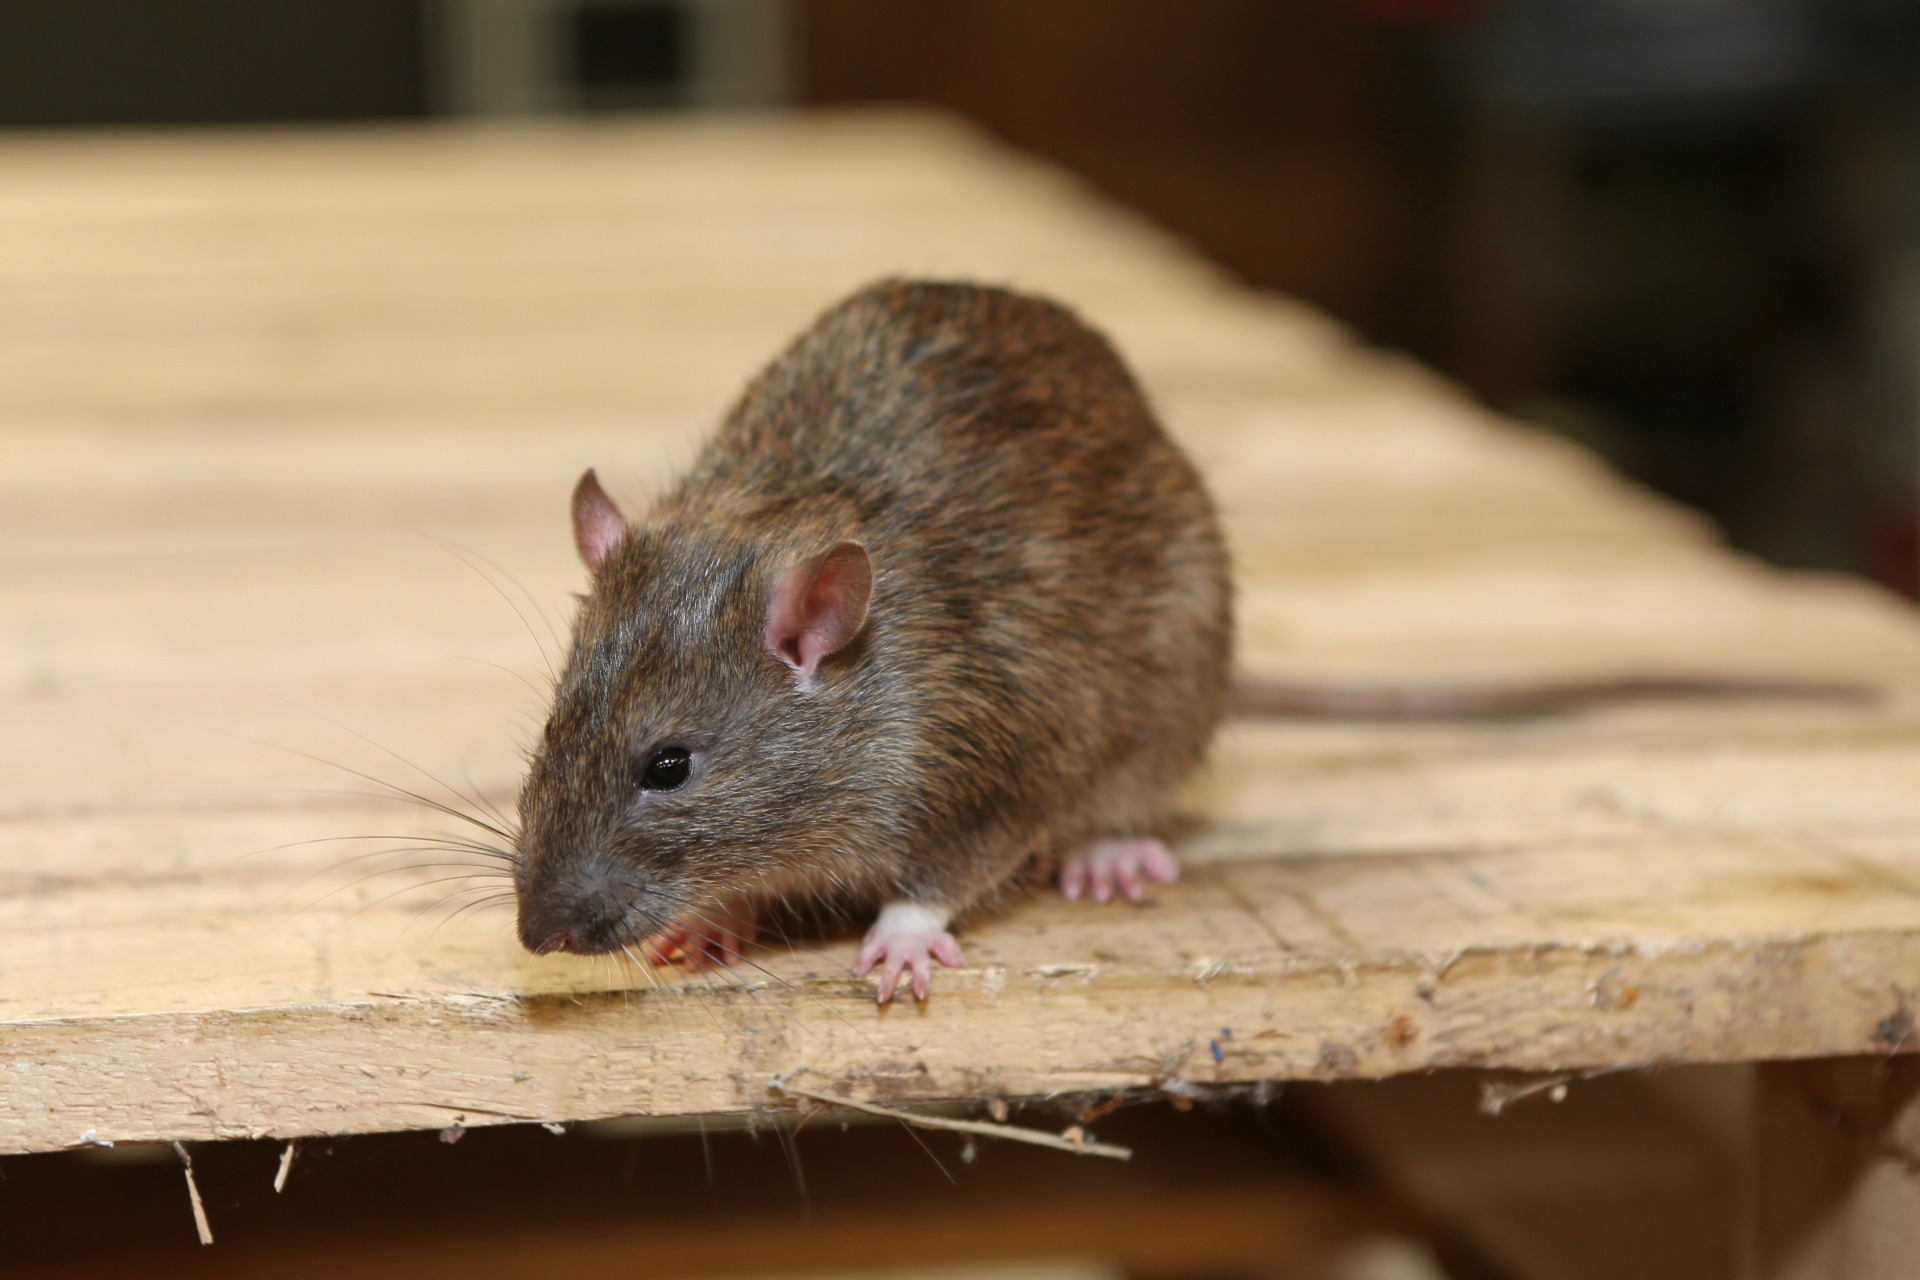 Rat Infestation, Pest Control in Penge, Anerley, SE20. Call Now 020 8166 9746